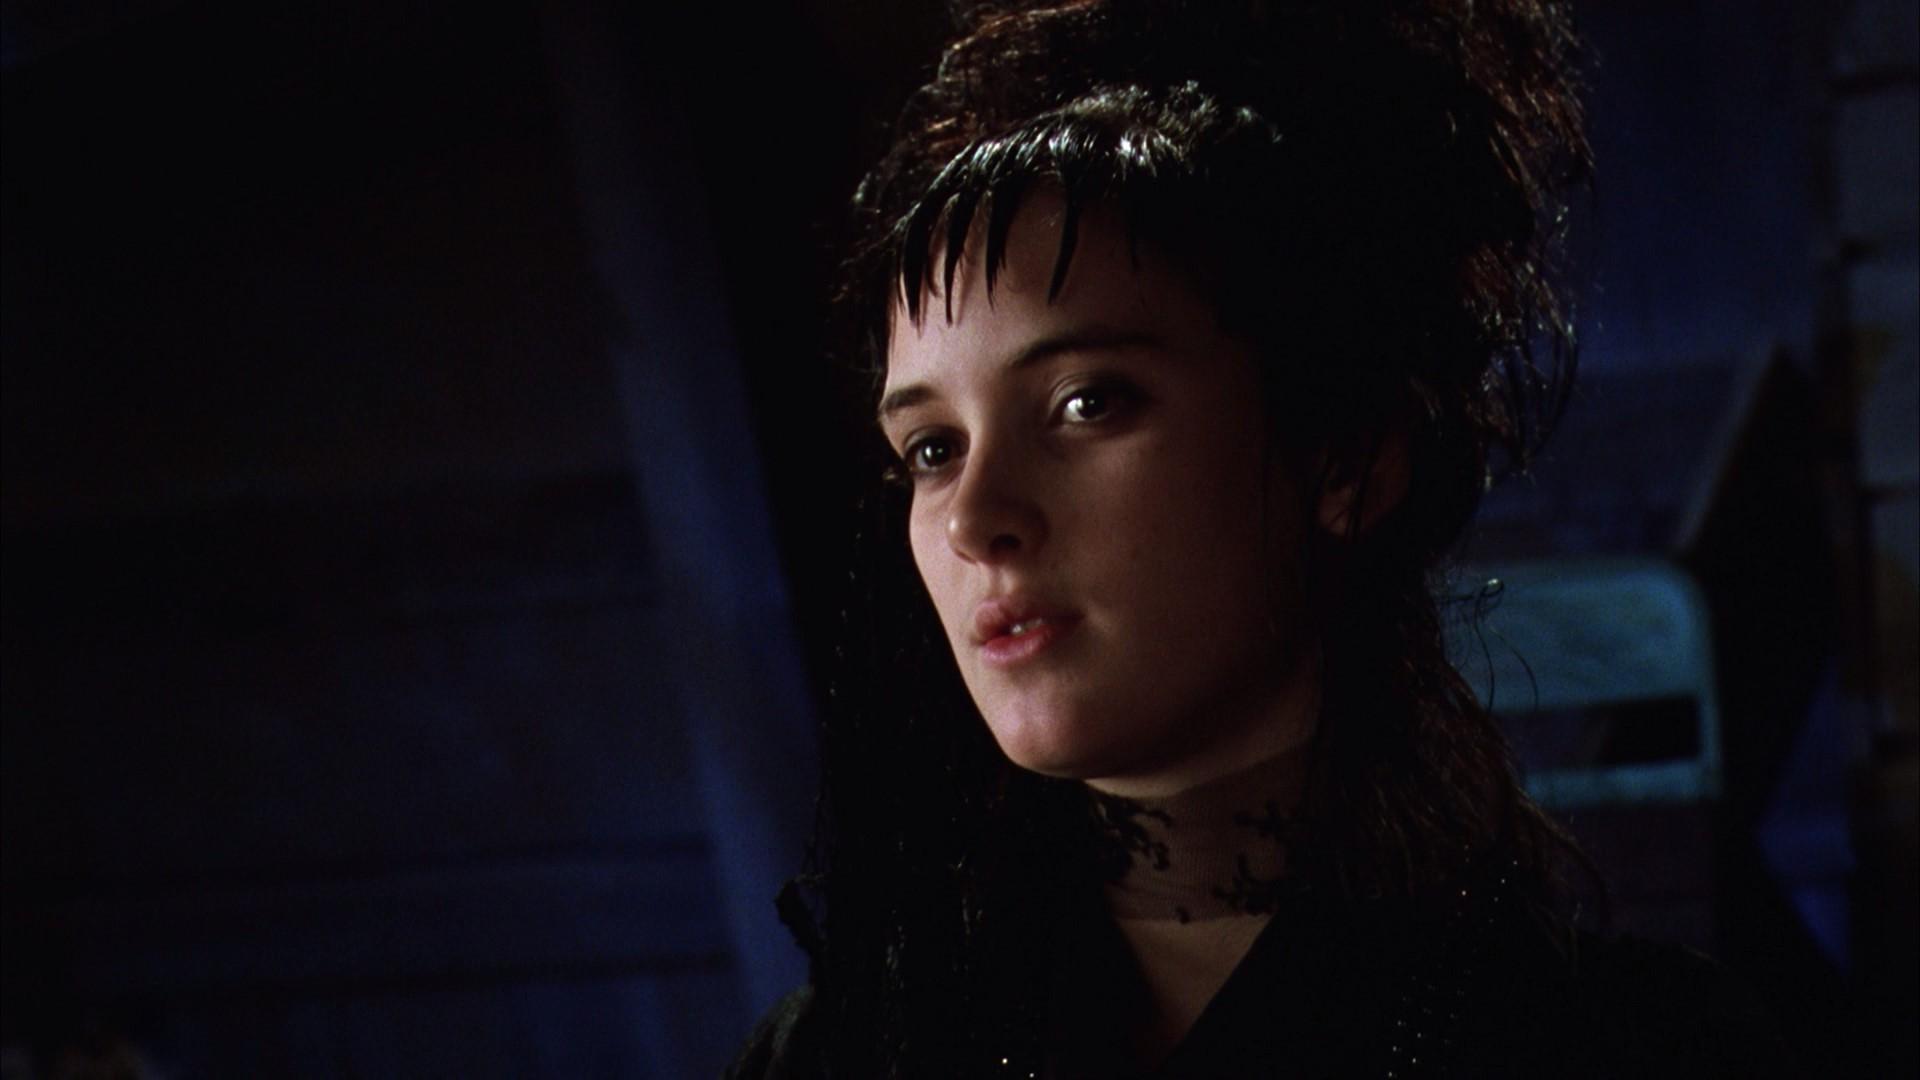 Winona Ryder Says 'Beetlejuice' Three Times, But Nothing Happens